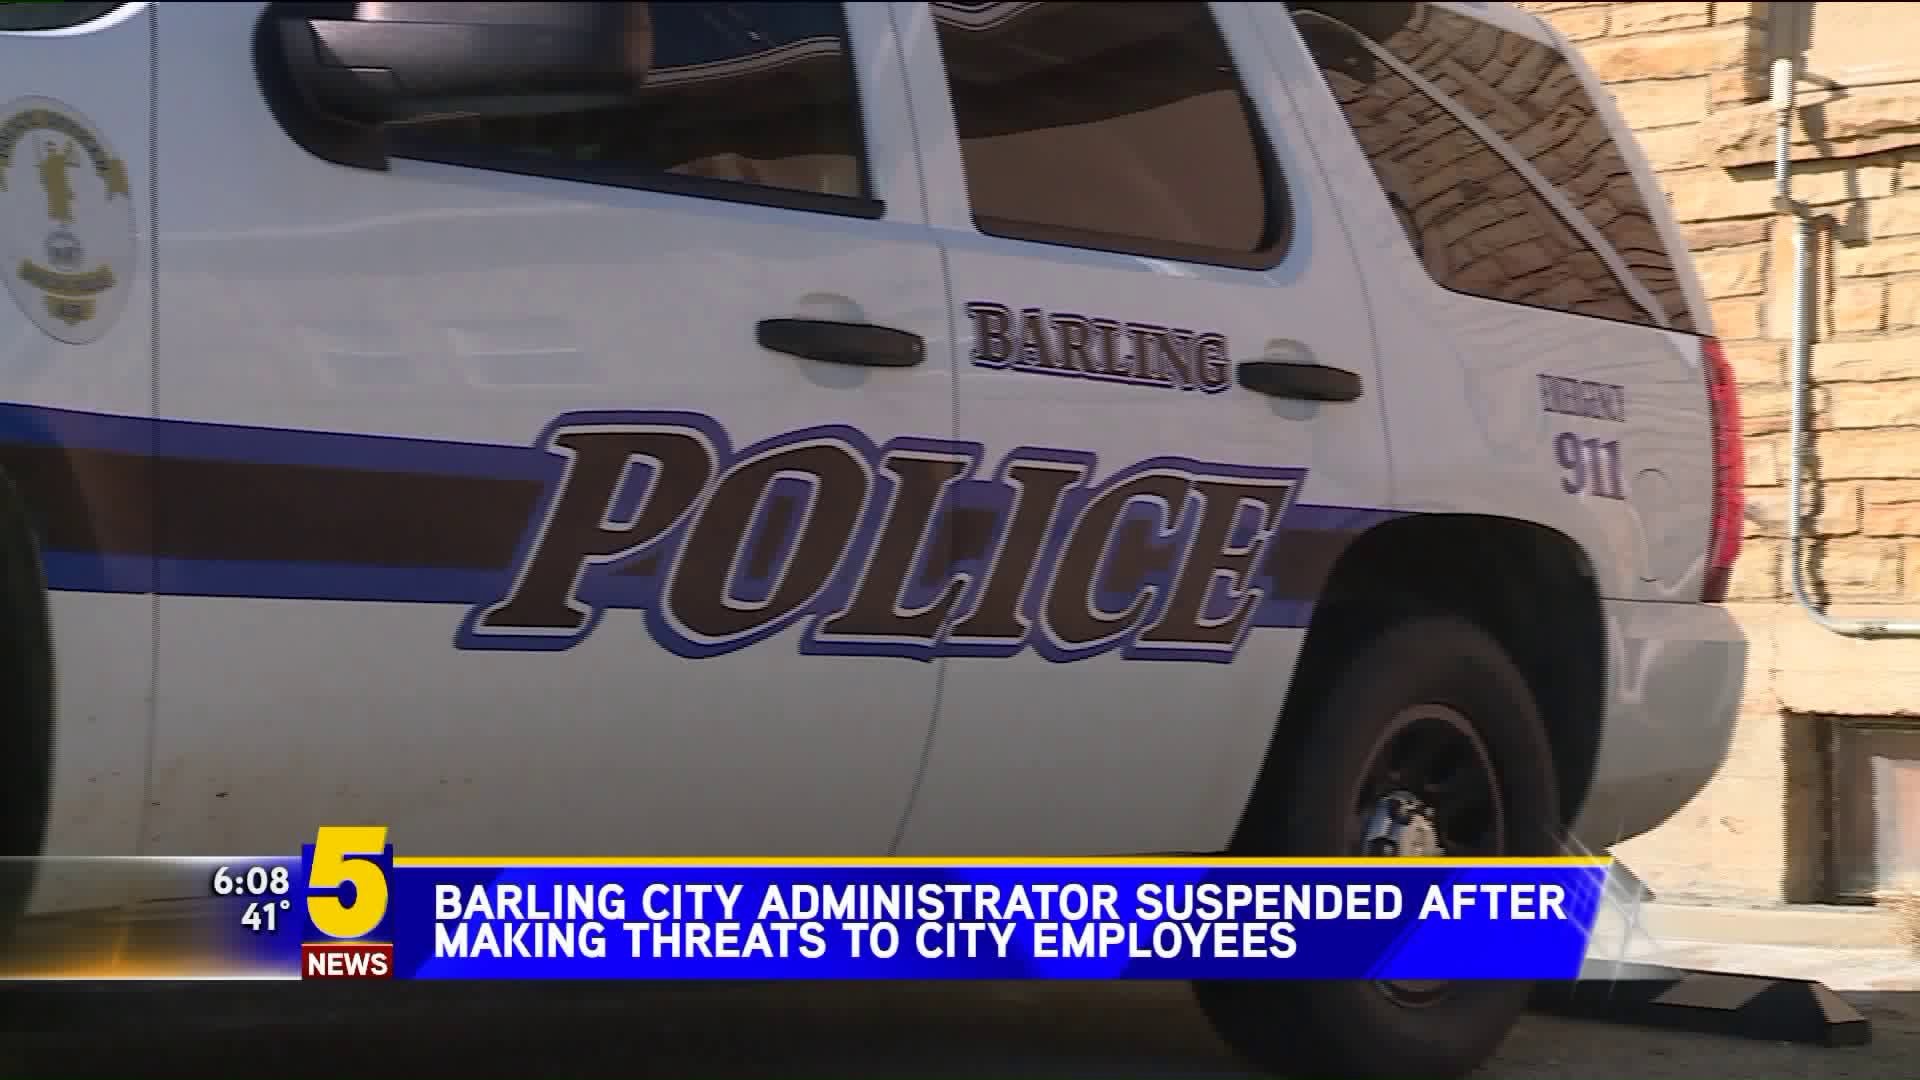 Barling city Administrator Suspended After Making Threats To City Employees